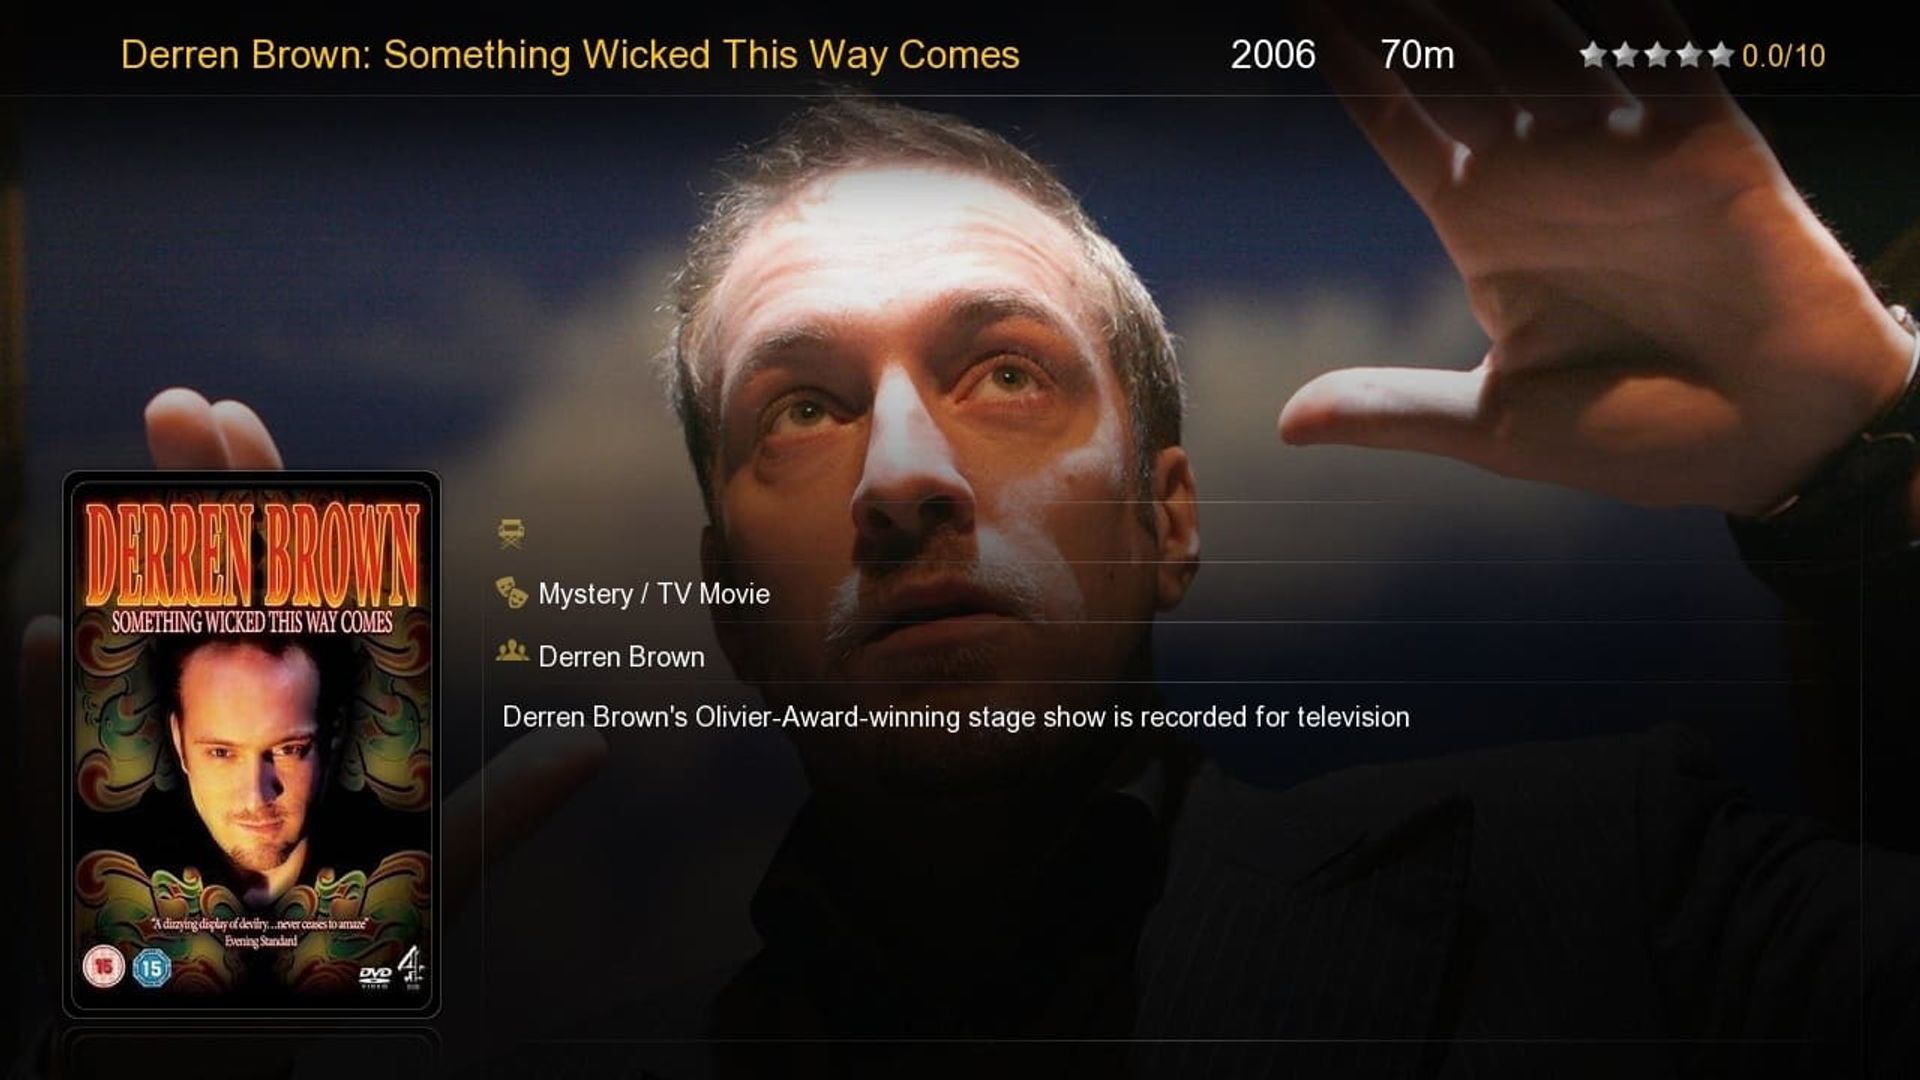 Derren Brown: Something Wicked This Way Comes background